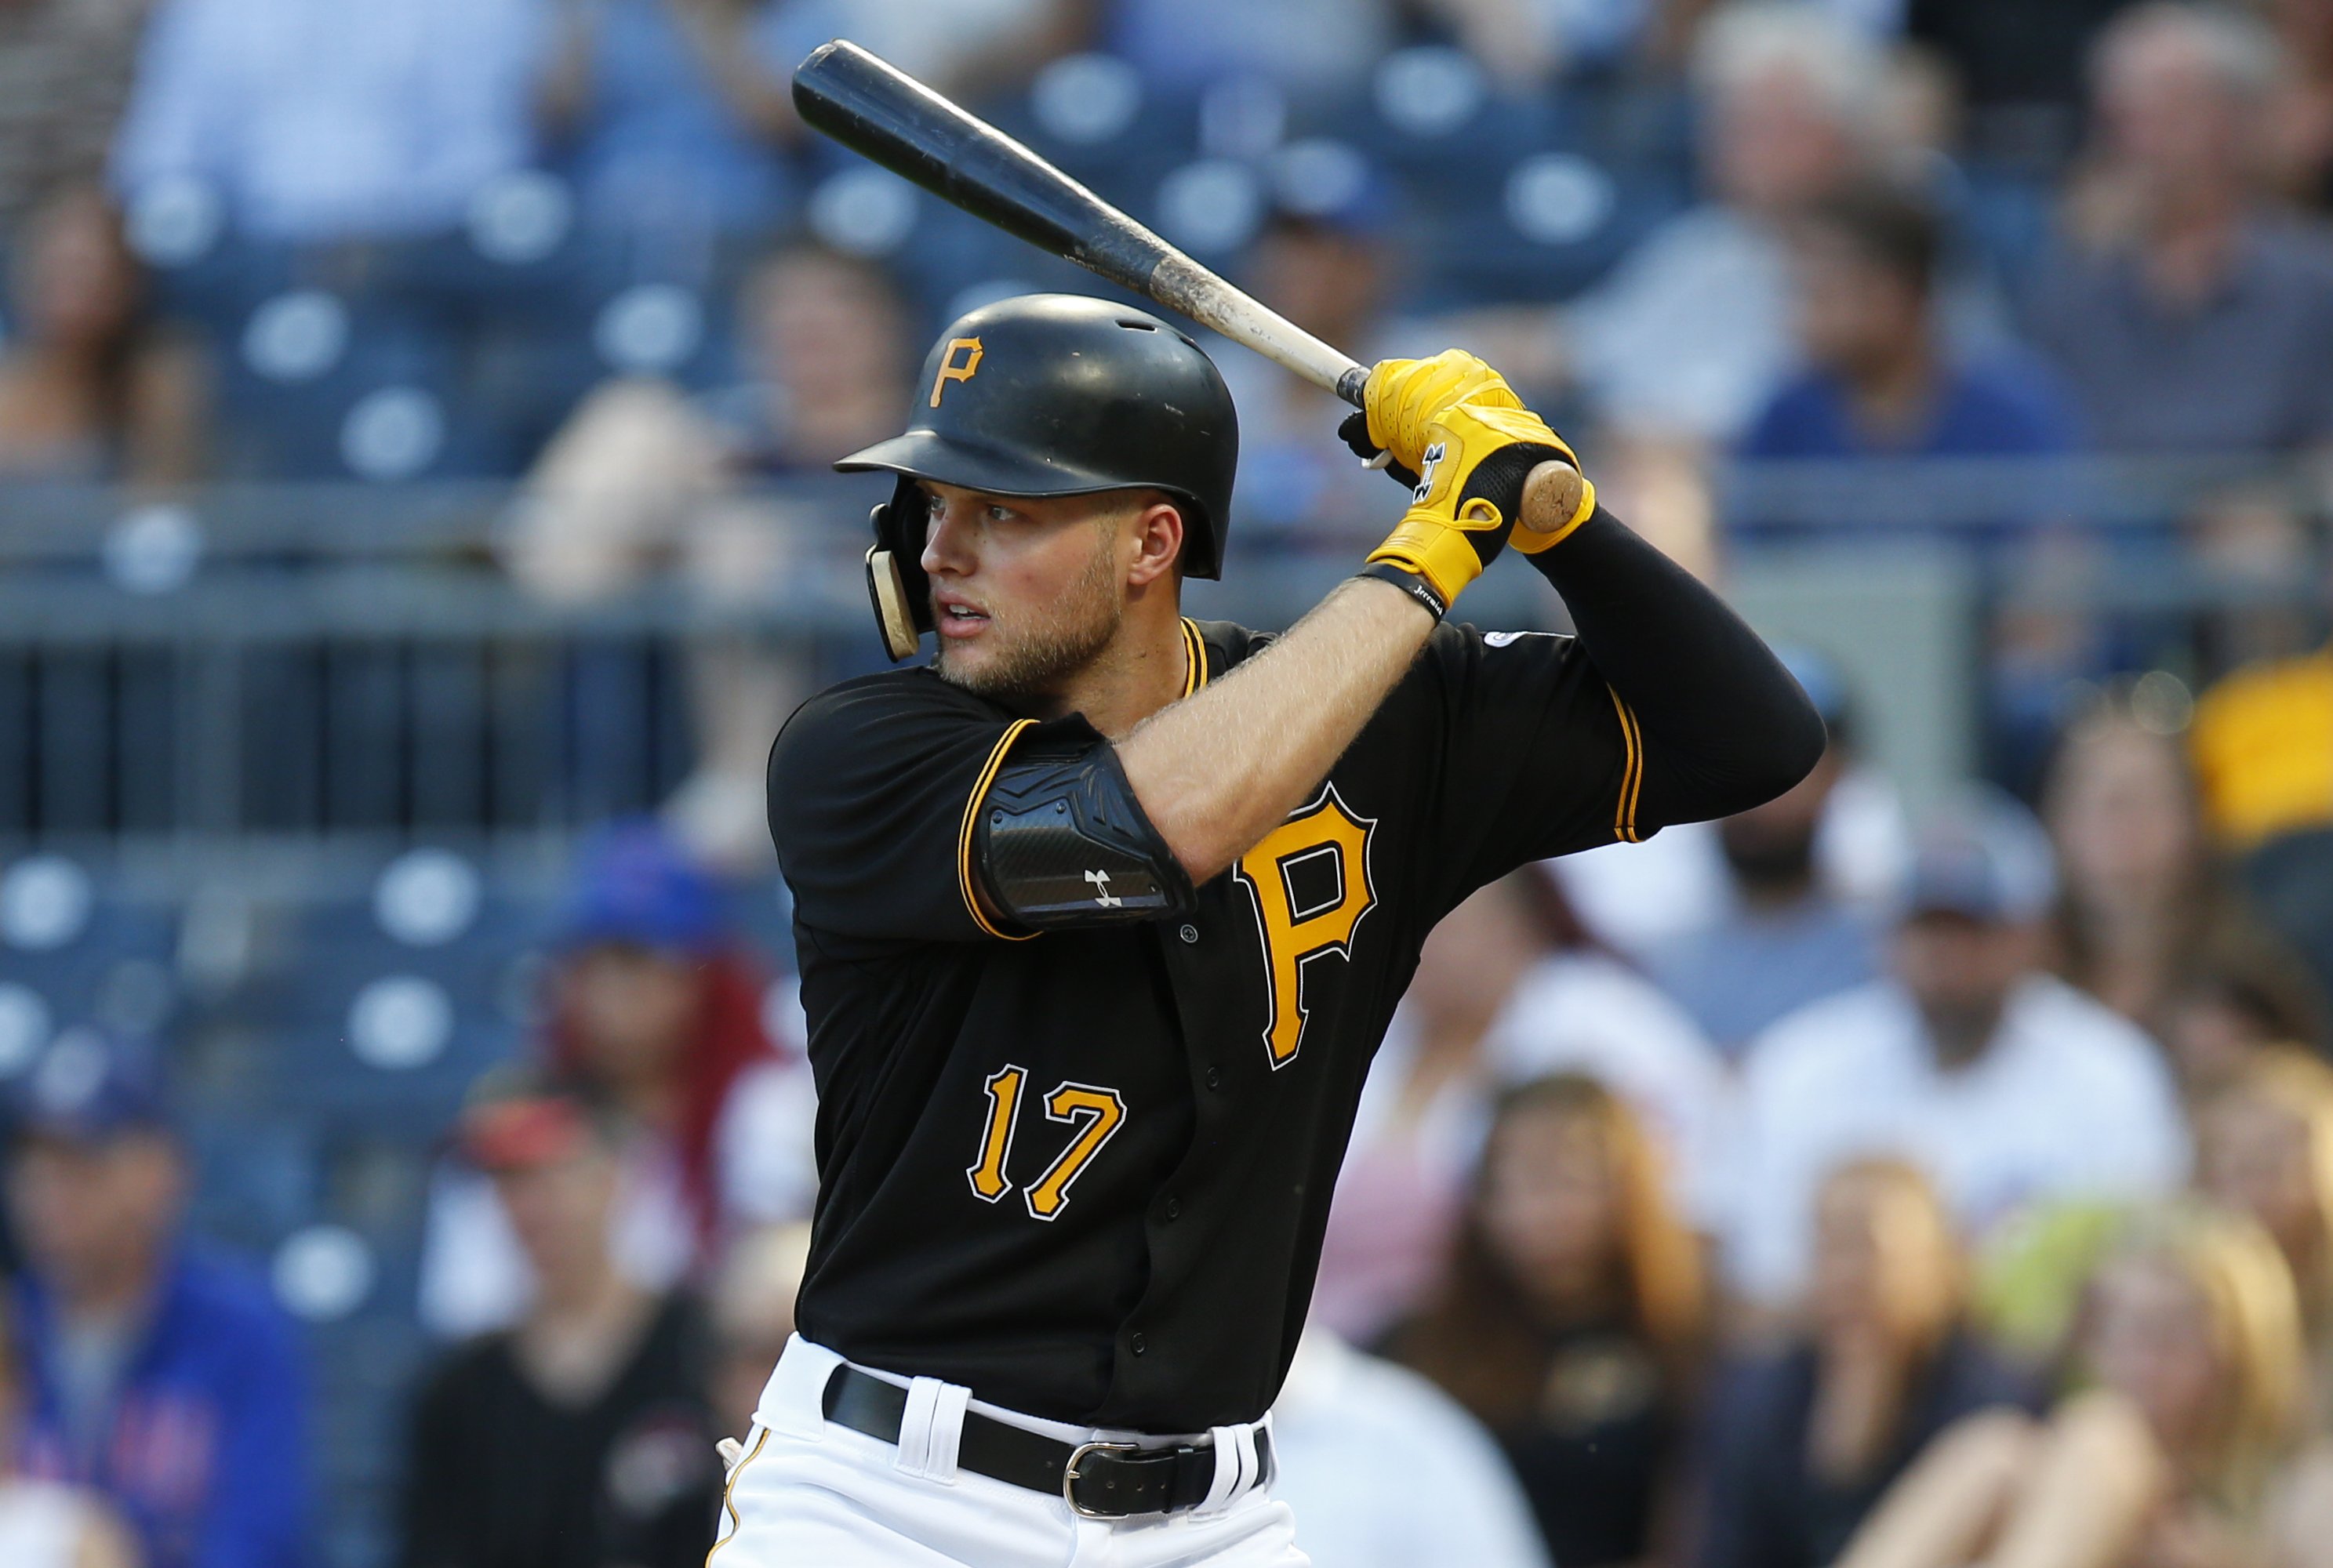 Pirates prospect Cole Tucker could add flavor to infield